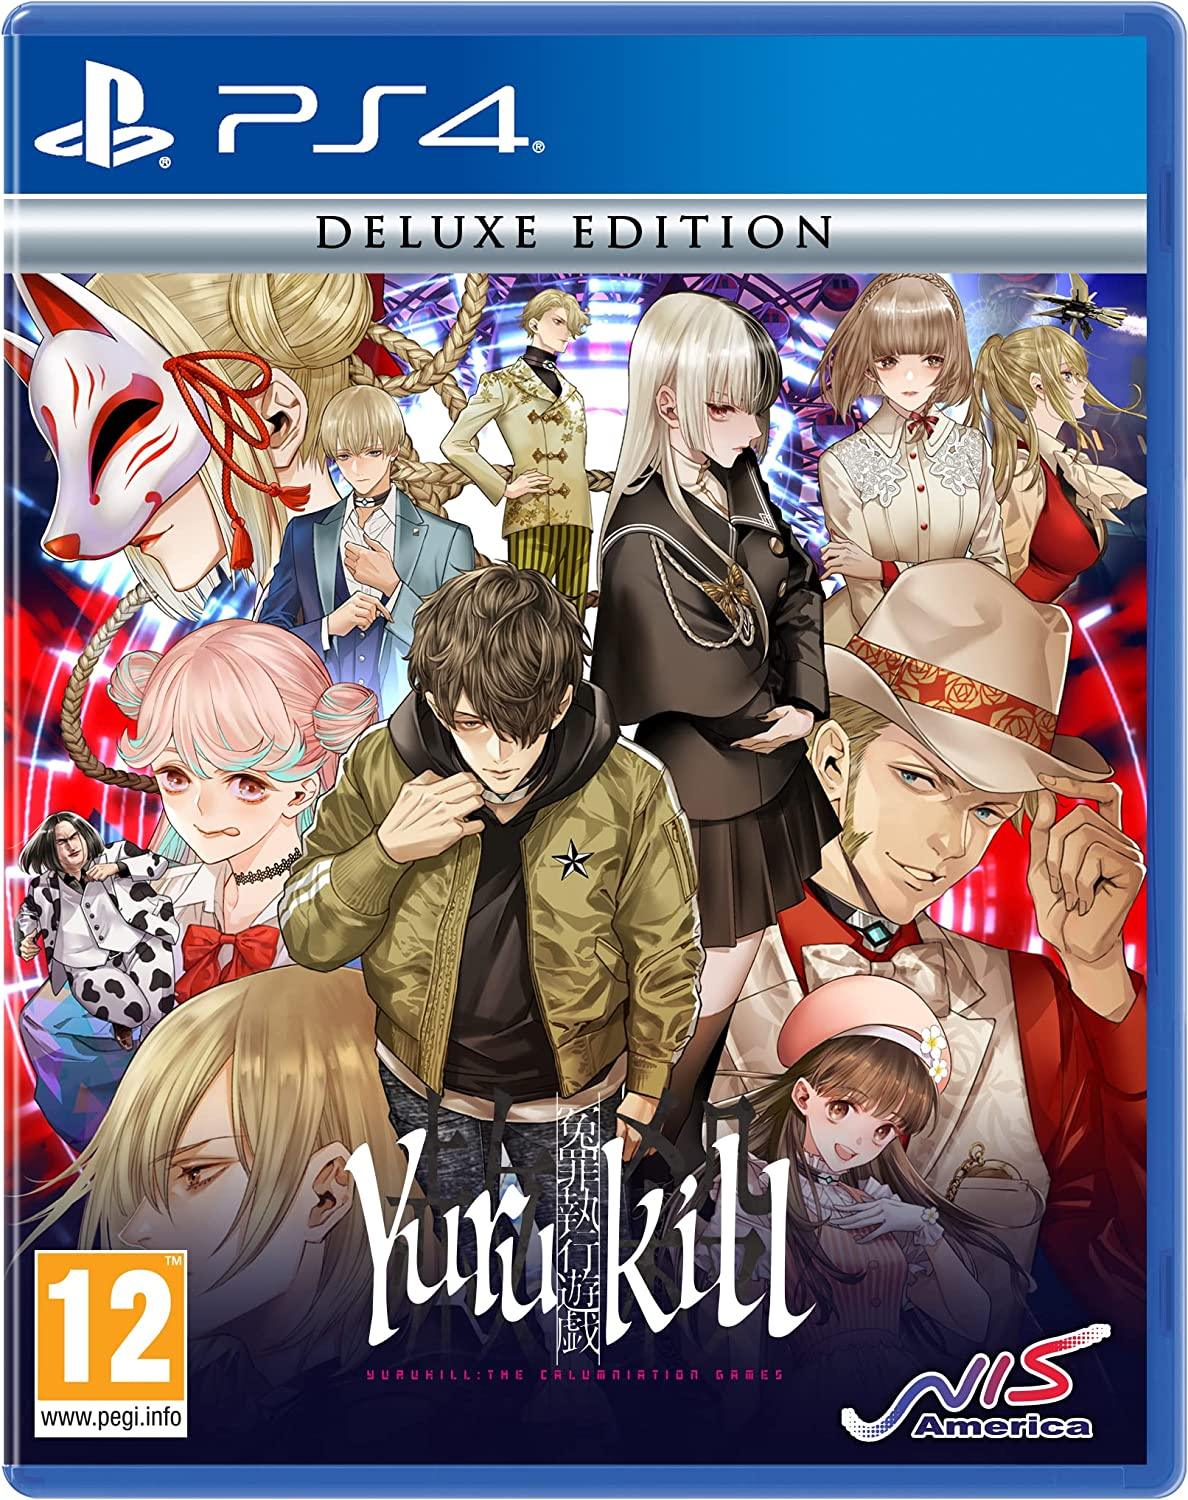 Yurukill: The Calumniation Games Deluxe Edition (PS4) - GameStore.mt | Powered by Flutisat